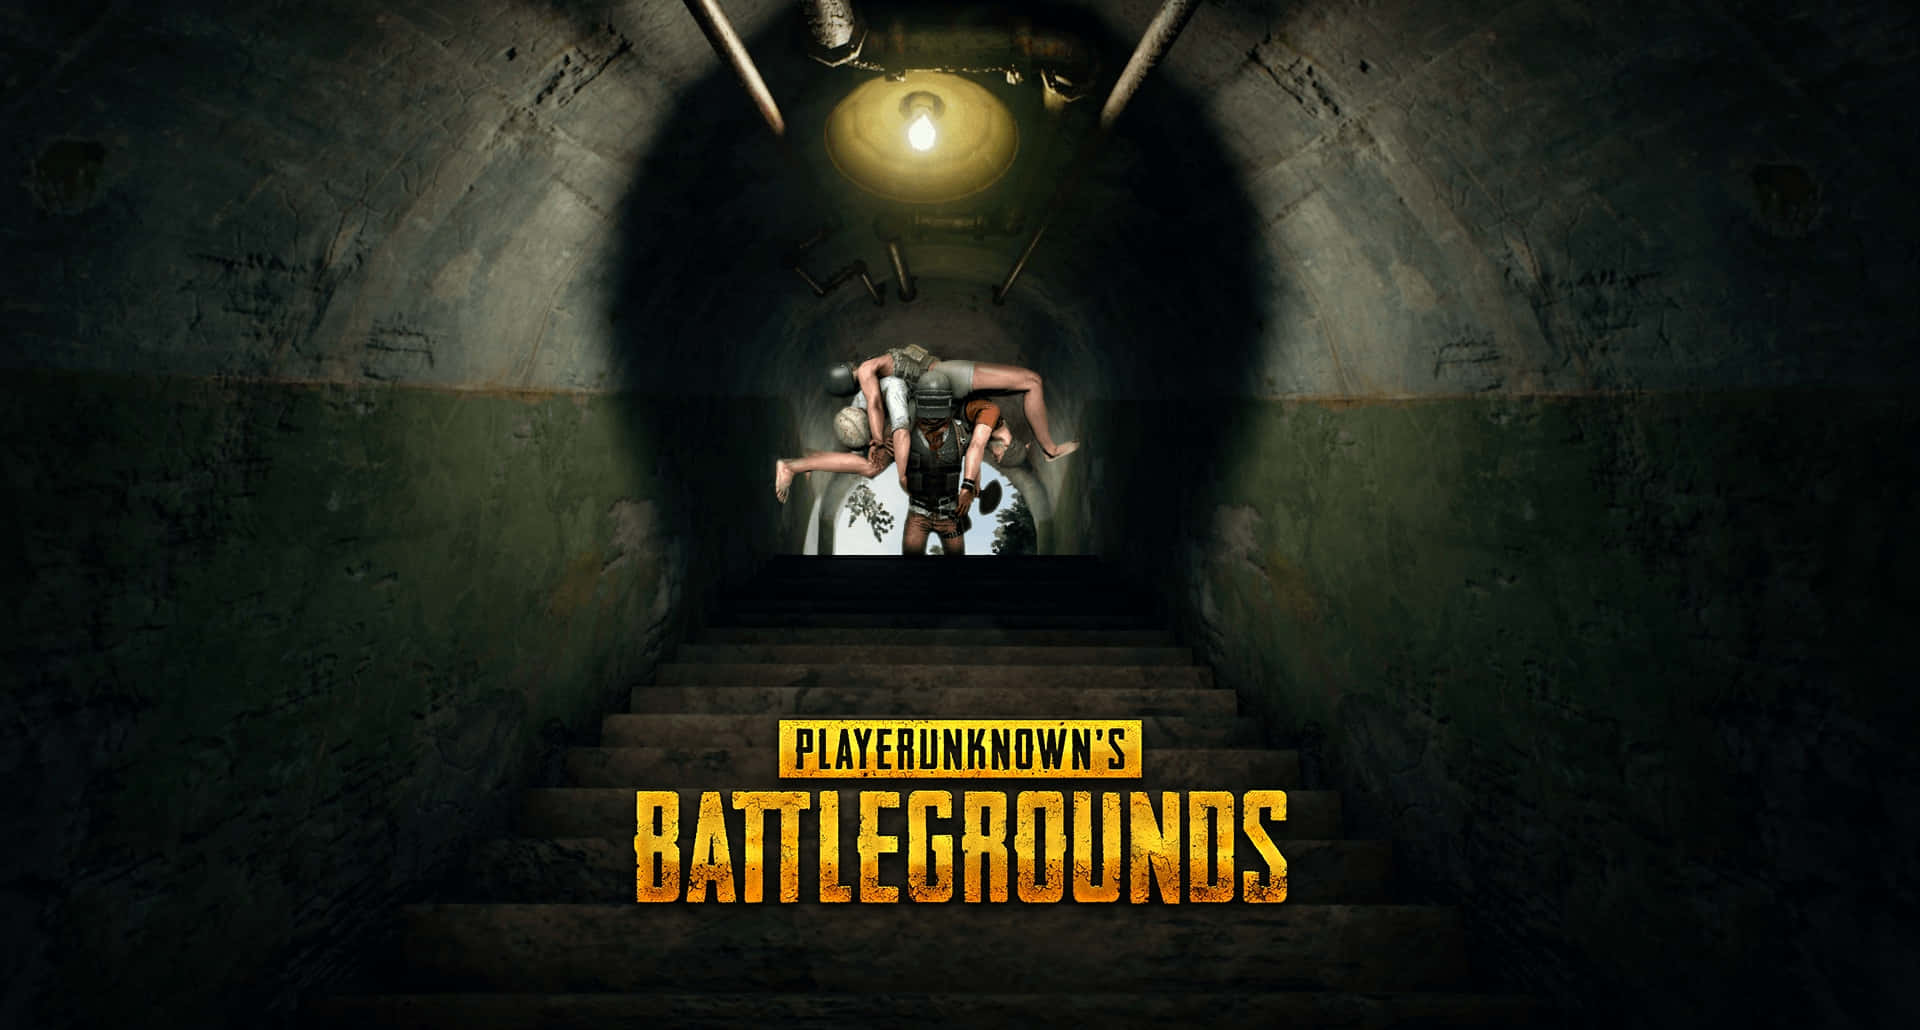 The official logo of the popular video game, PUBG.